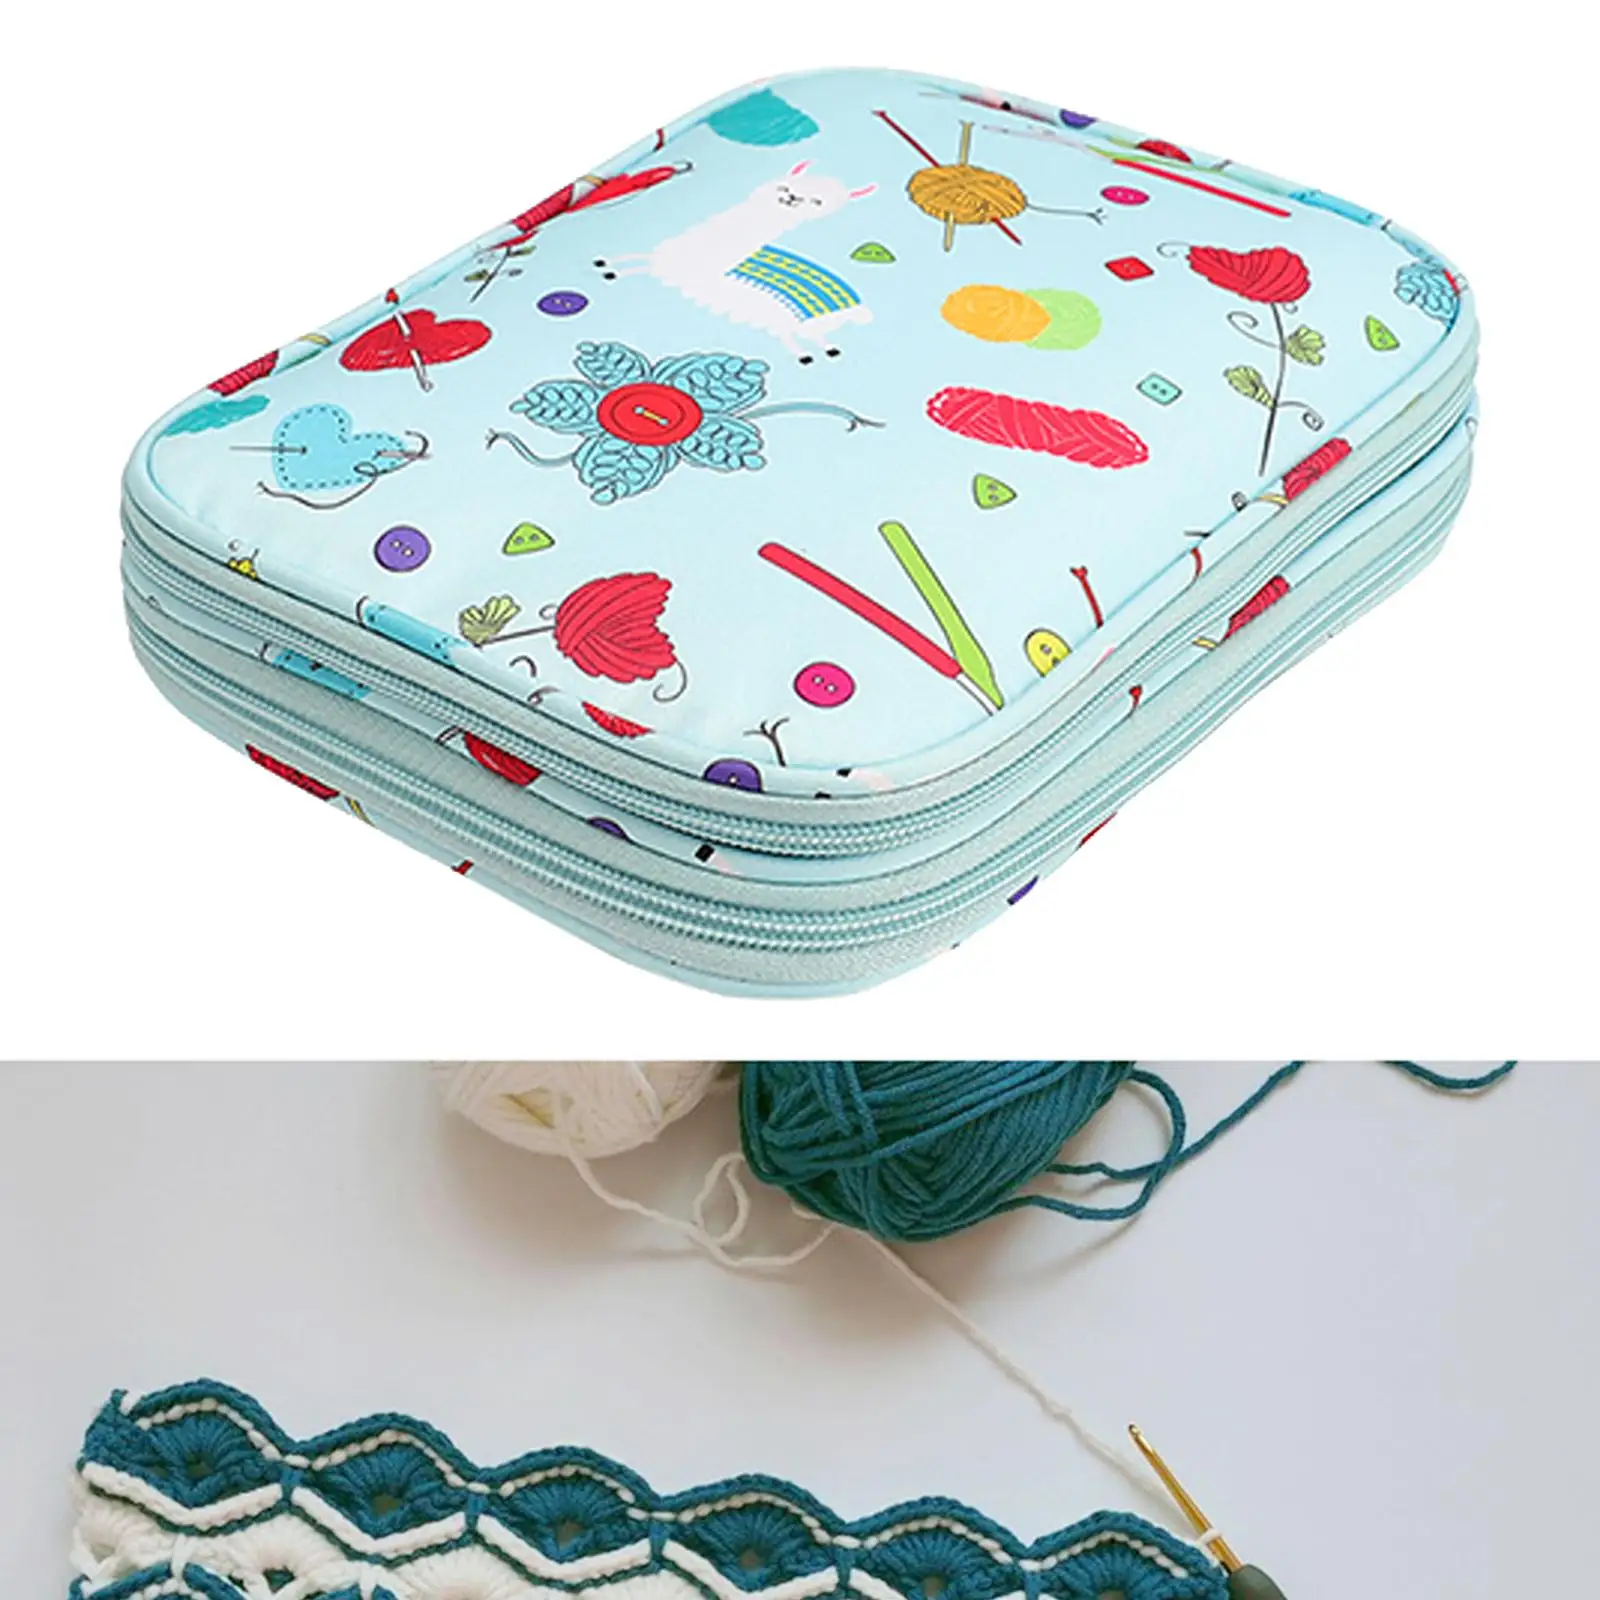 Travel Knitting Needle Case Pouch Organizer Durable Compact Versatile with Mesh Pockets for Carrying Various Crochet Needle